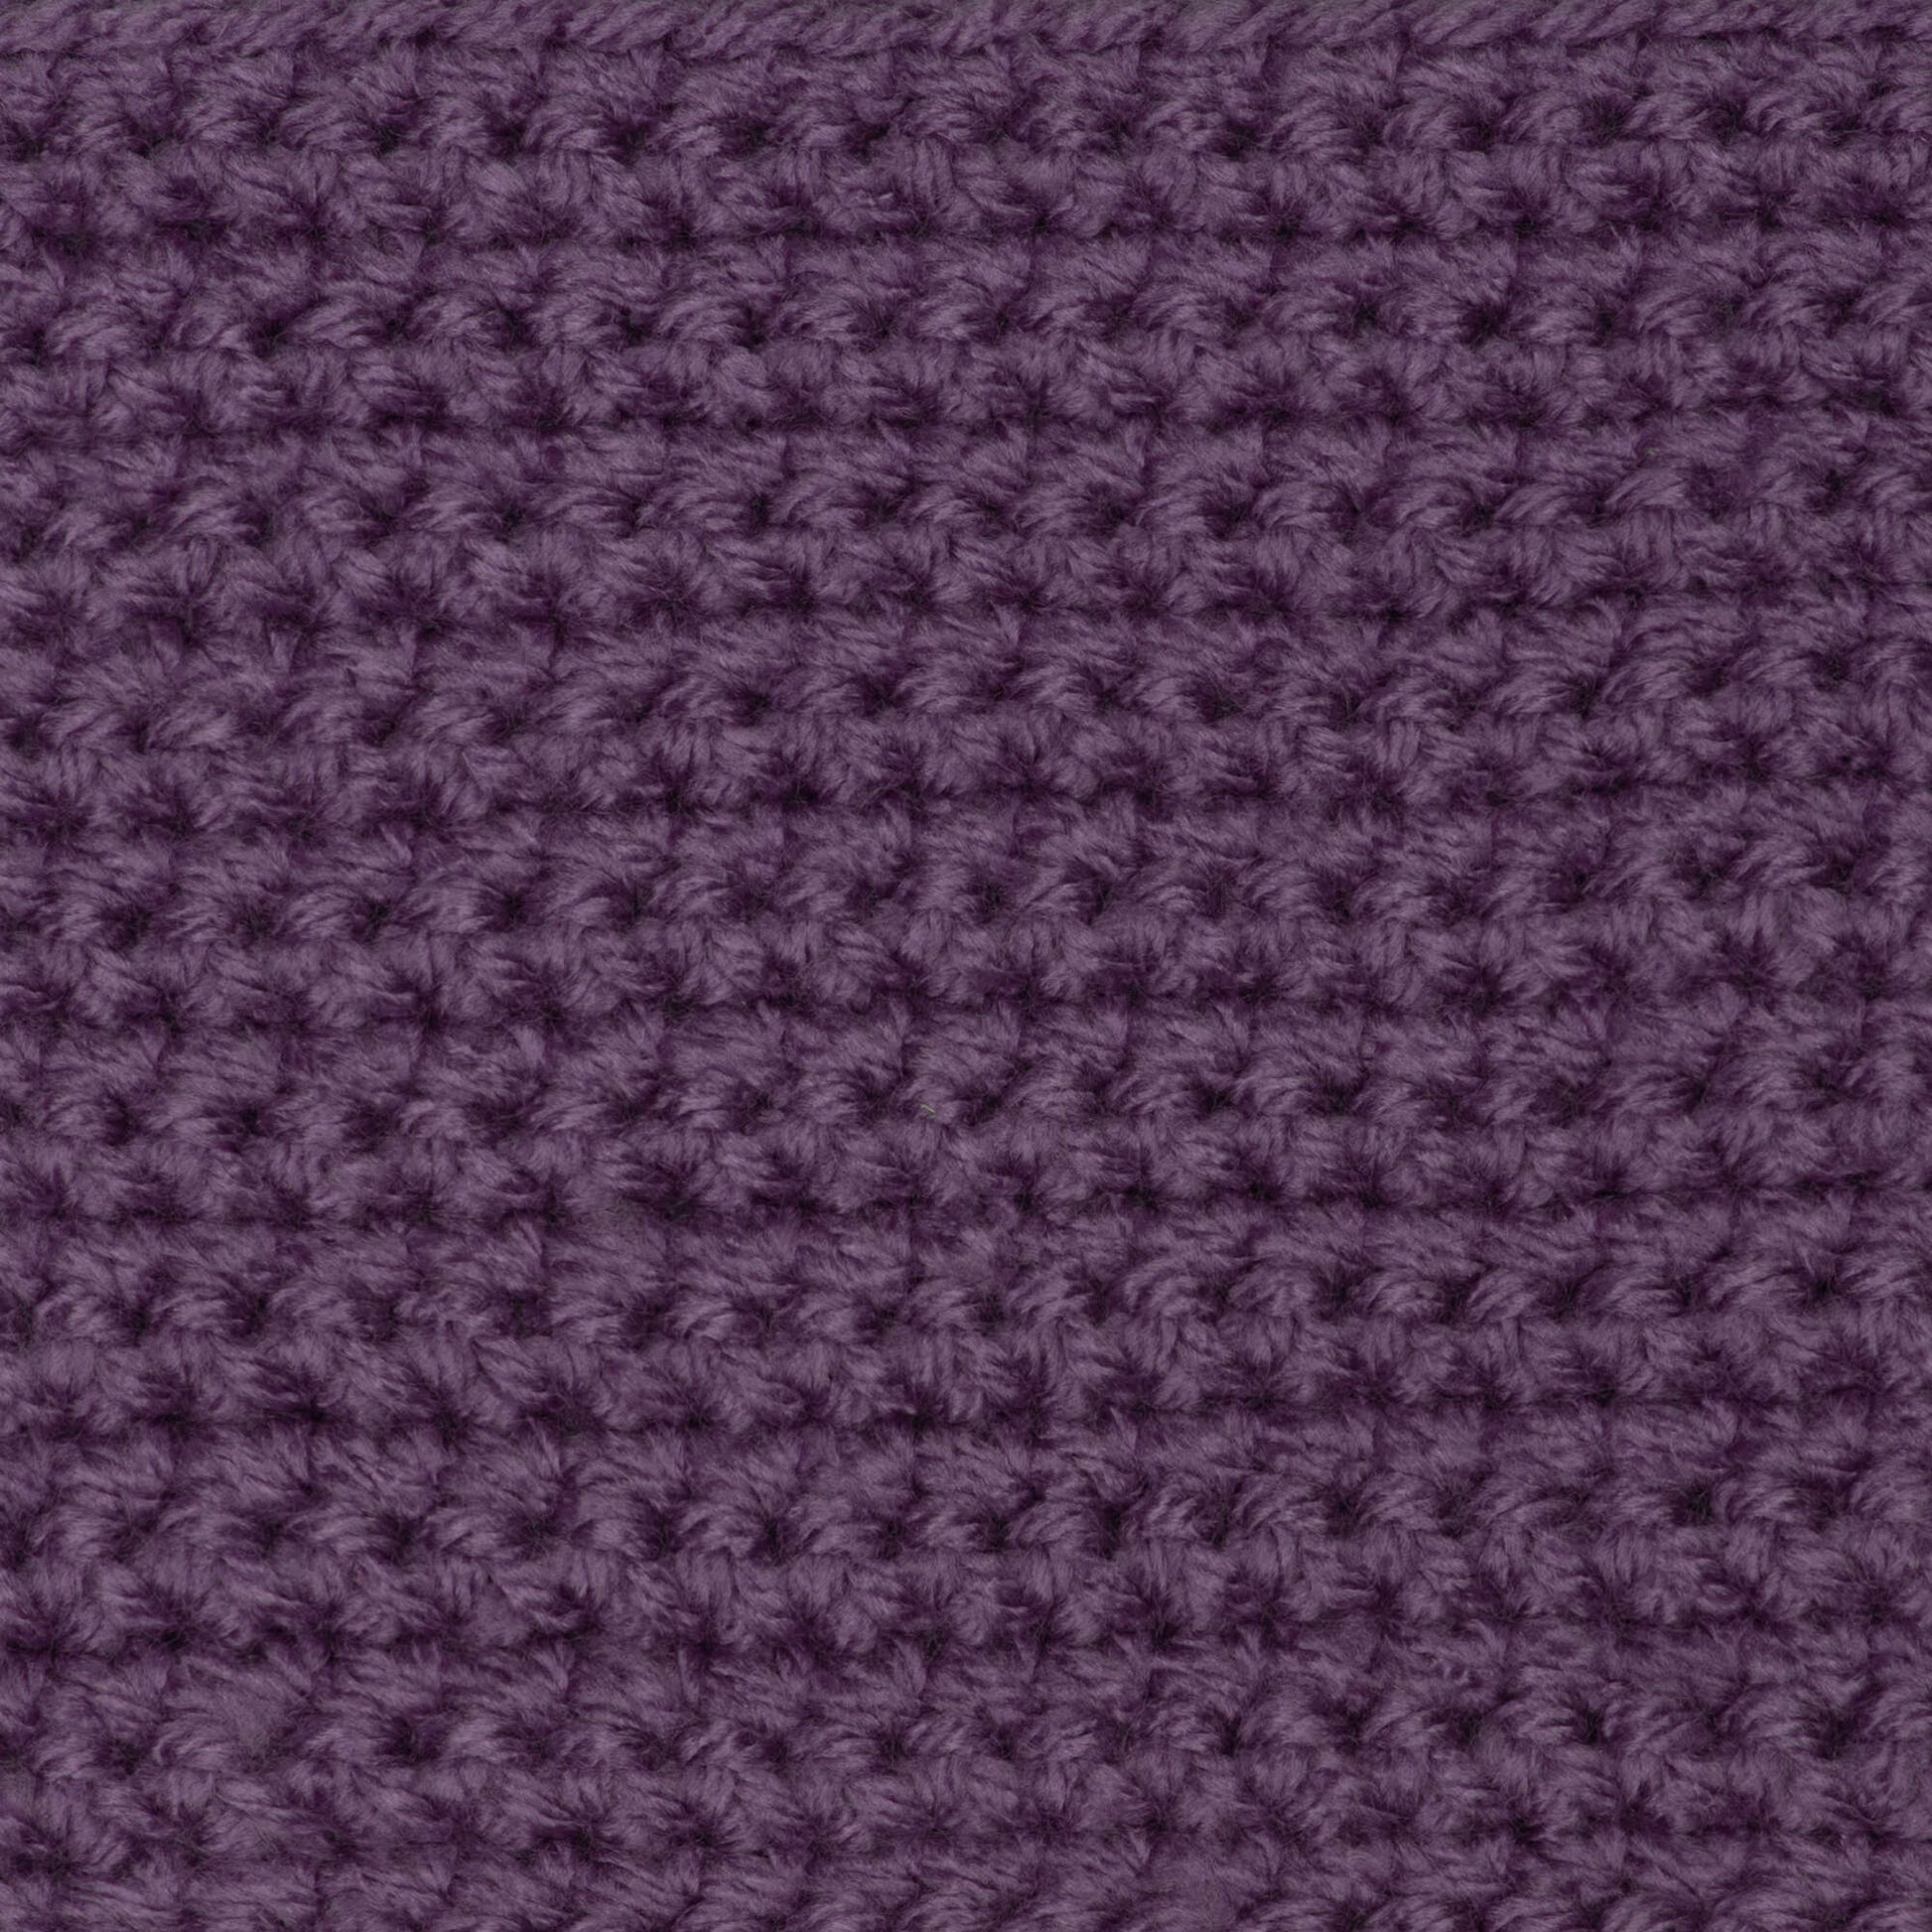 Red Heart With Love Yarn Lilac